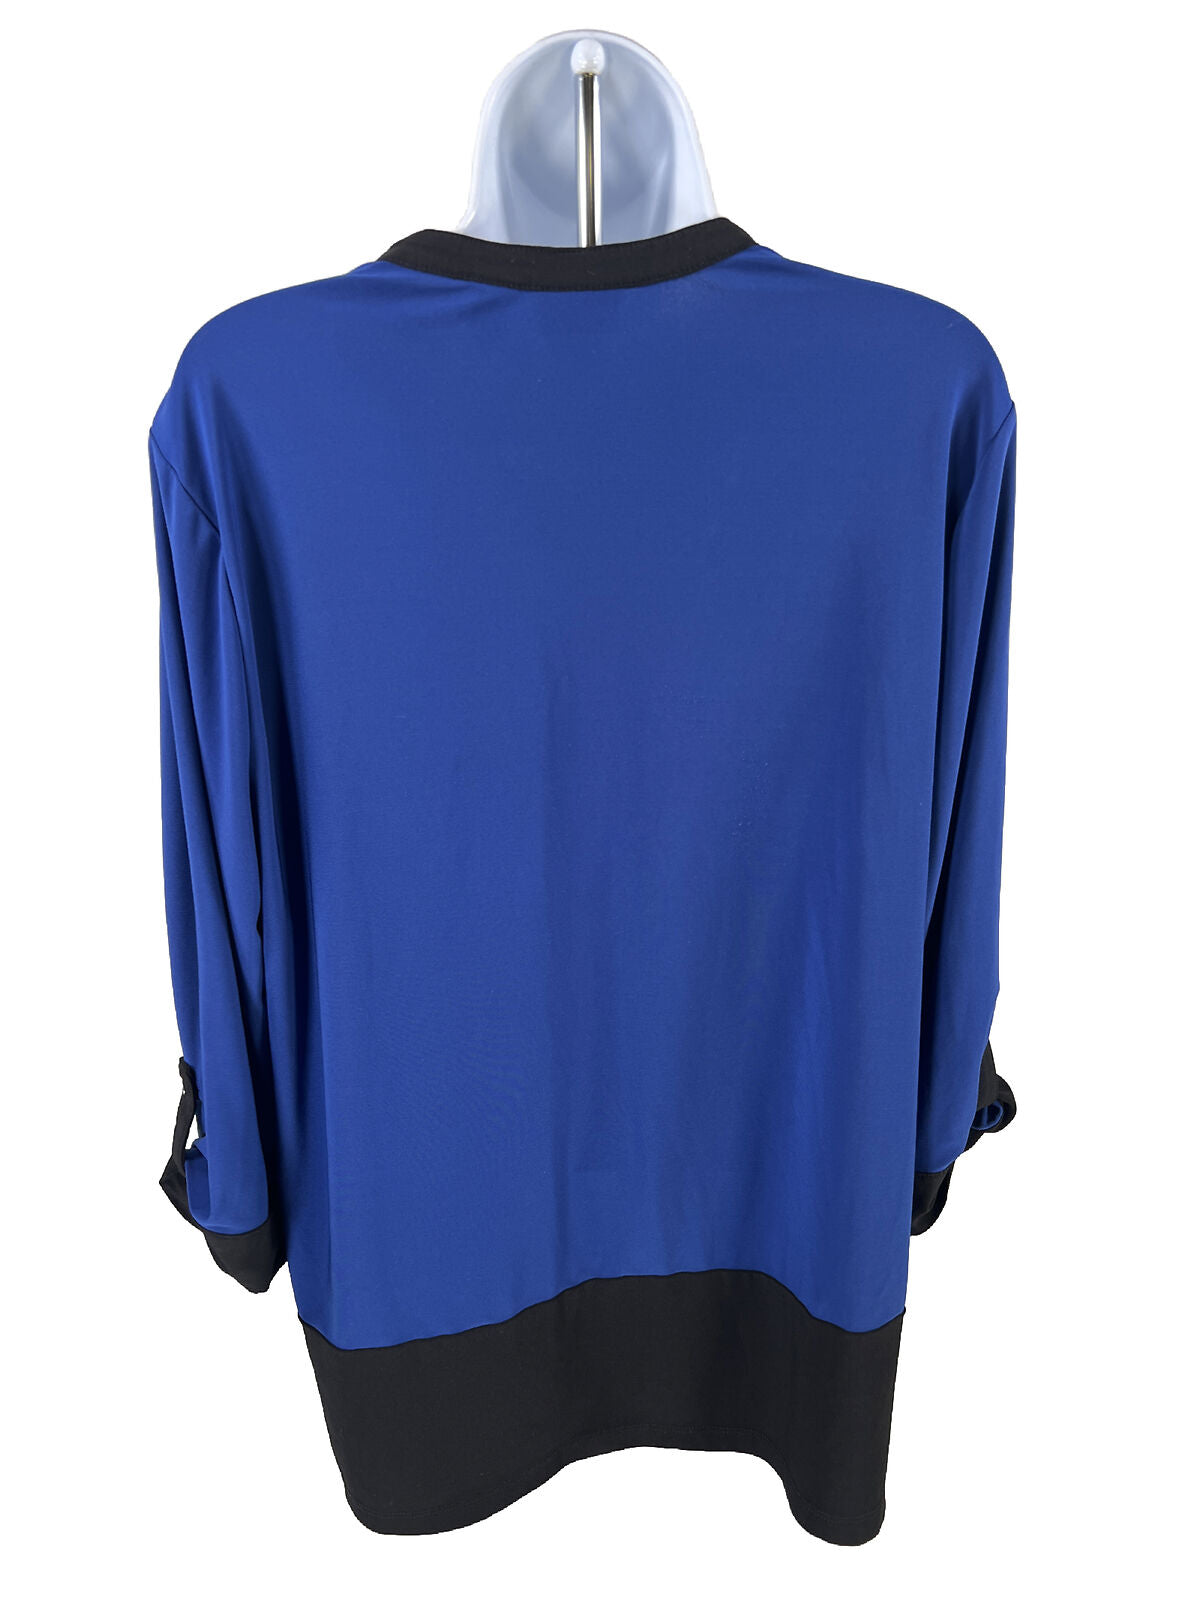 Chico's Top Easywear con mangas enrollables azules para mujer - 2/US L